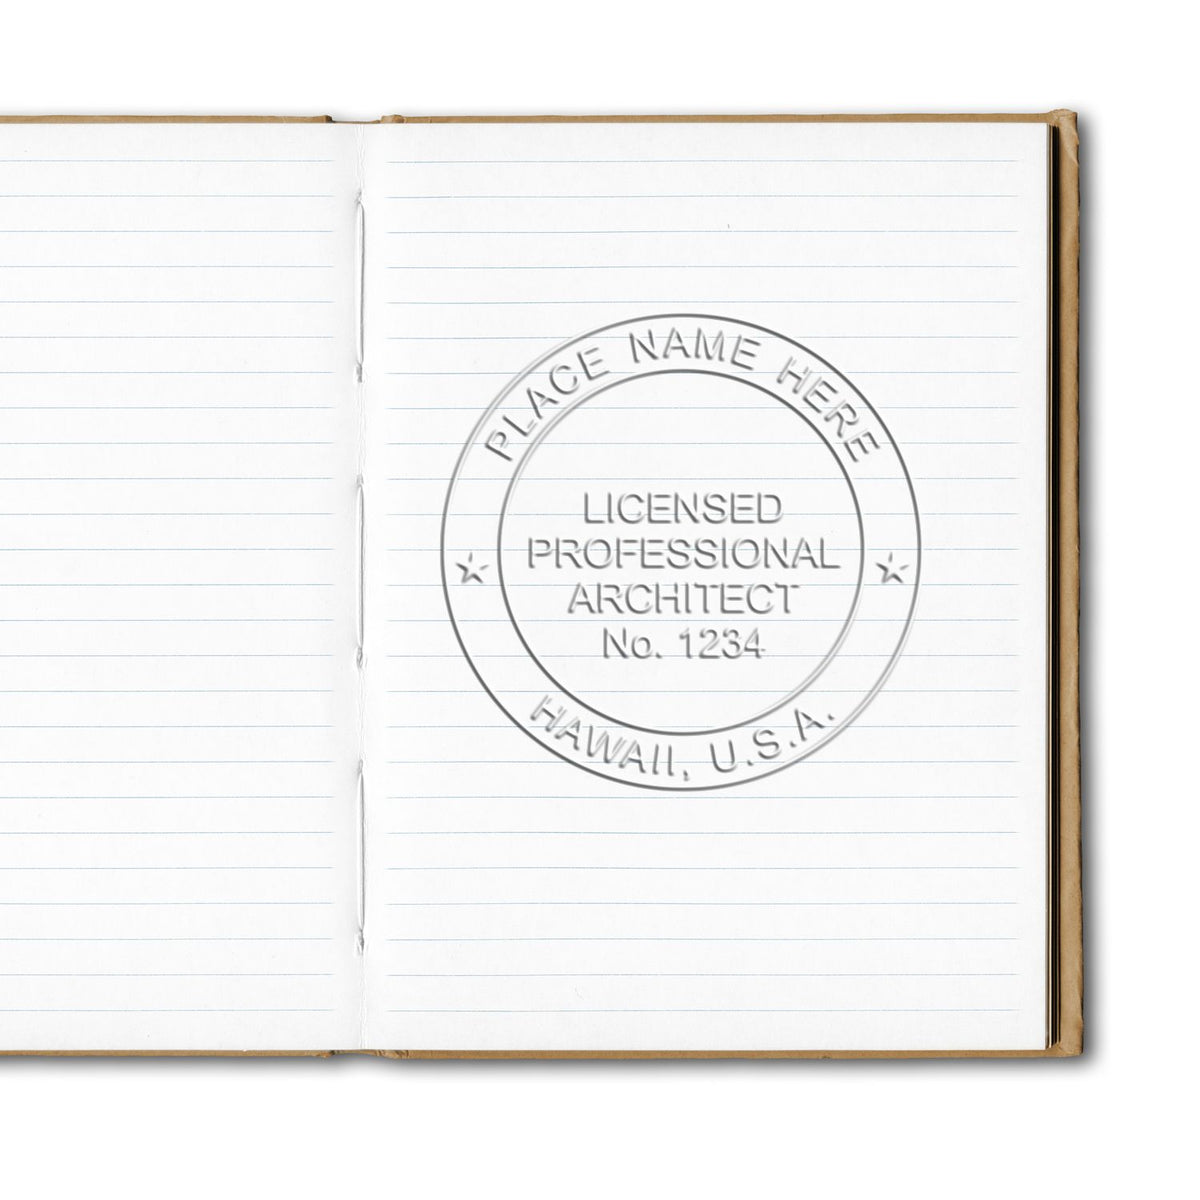 This paper is stamped with a sample imprint of the Handheld Hawaii Architect Seal Embosser, signifying its quality and reliability.